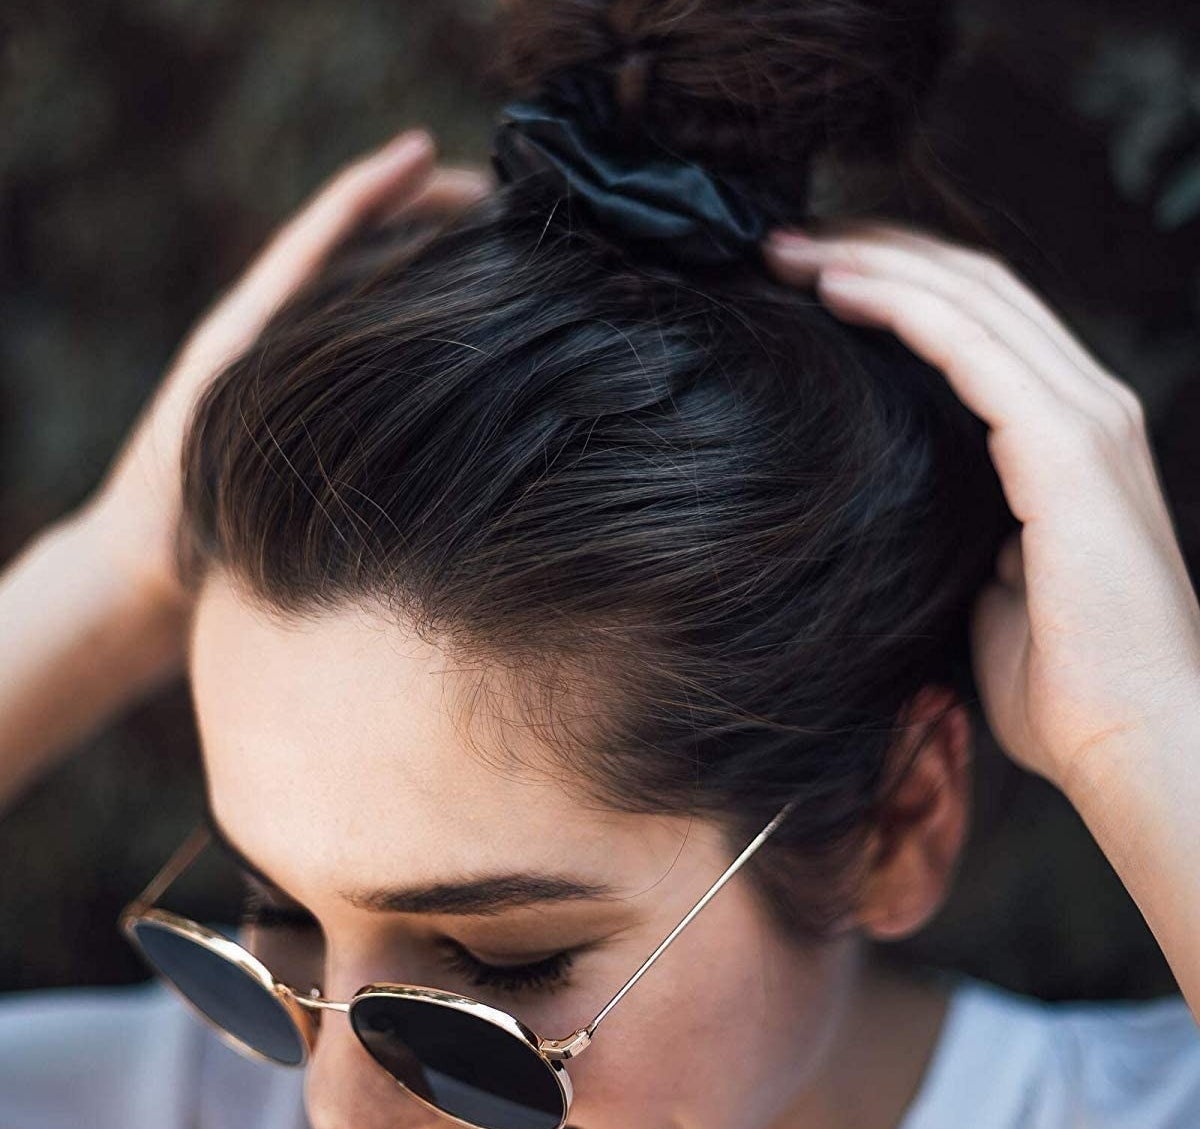 A person wearing sunglasses and a silk scrunchie in their hair